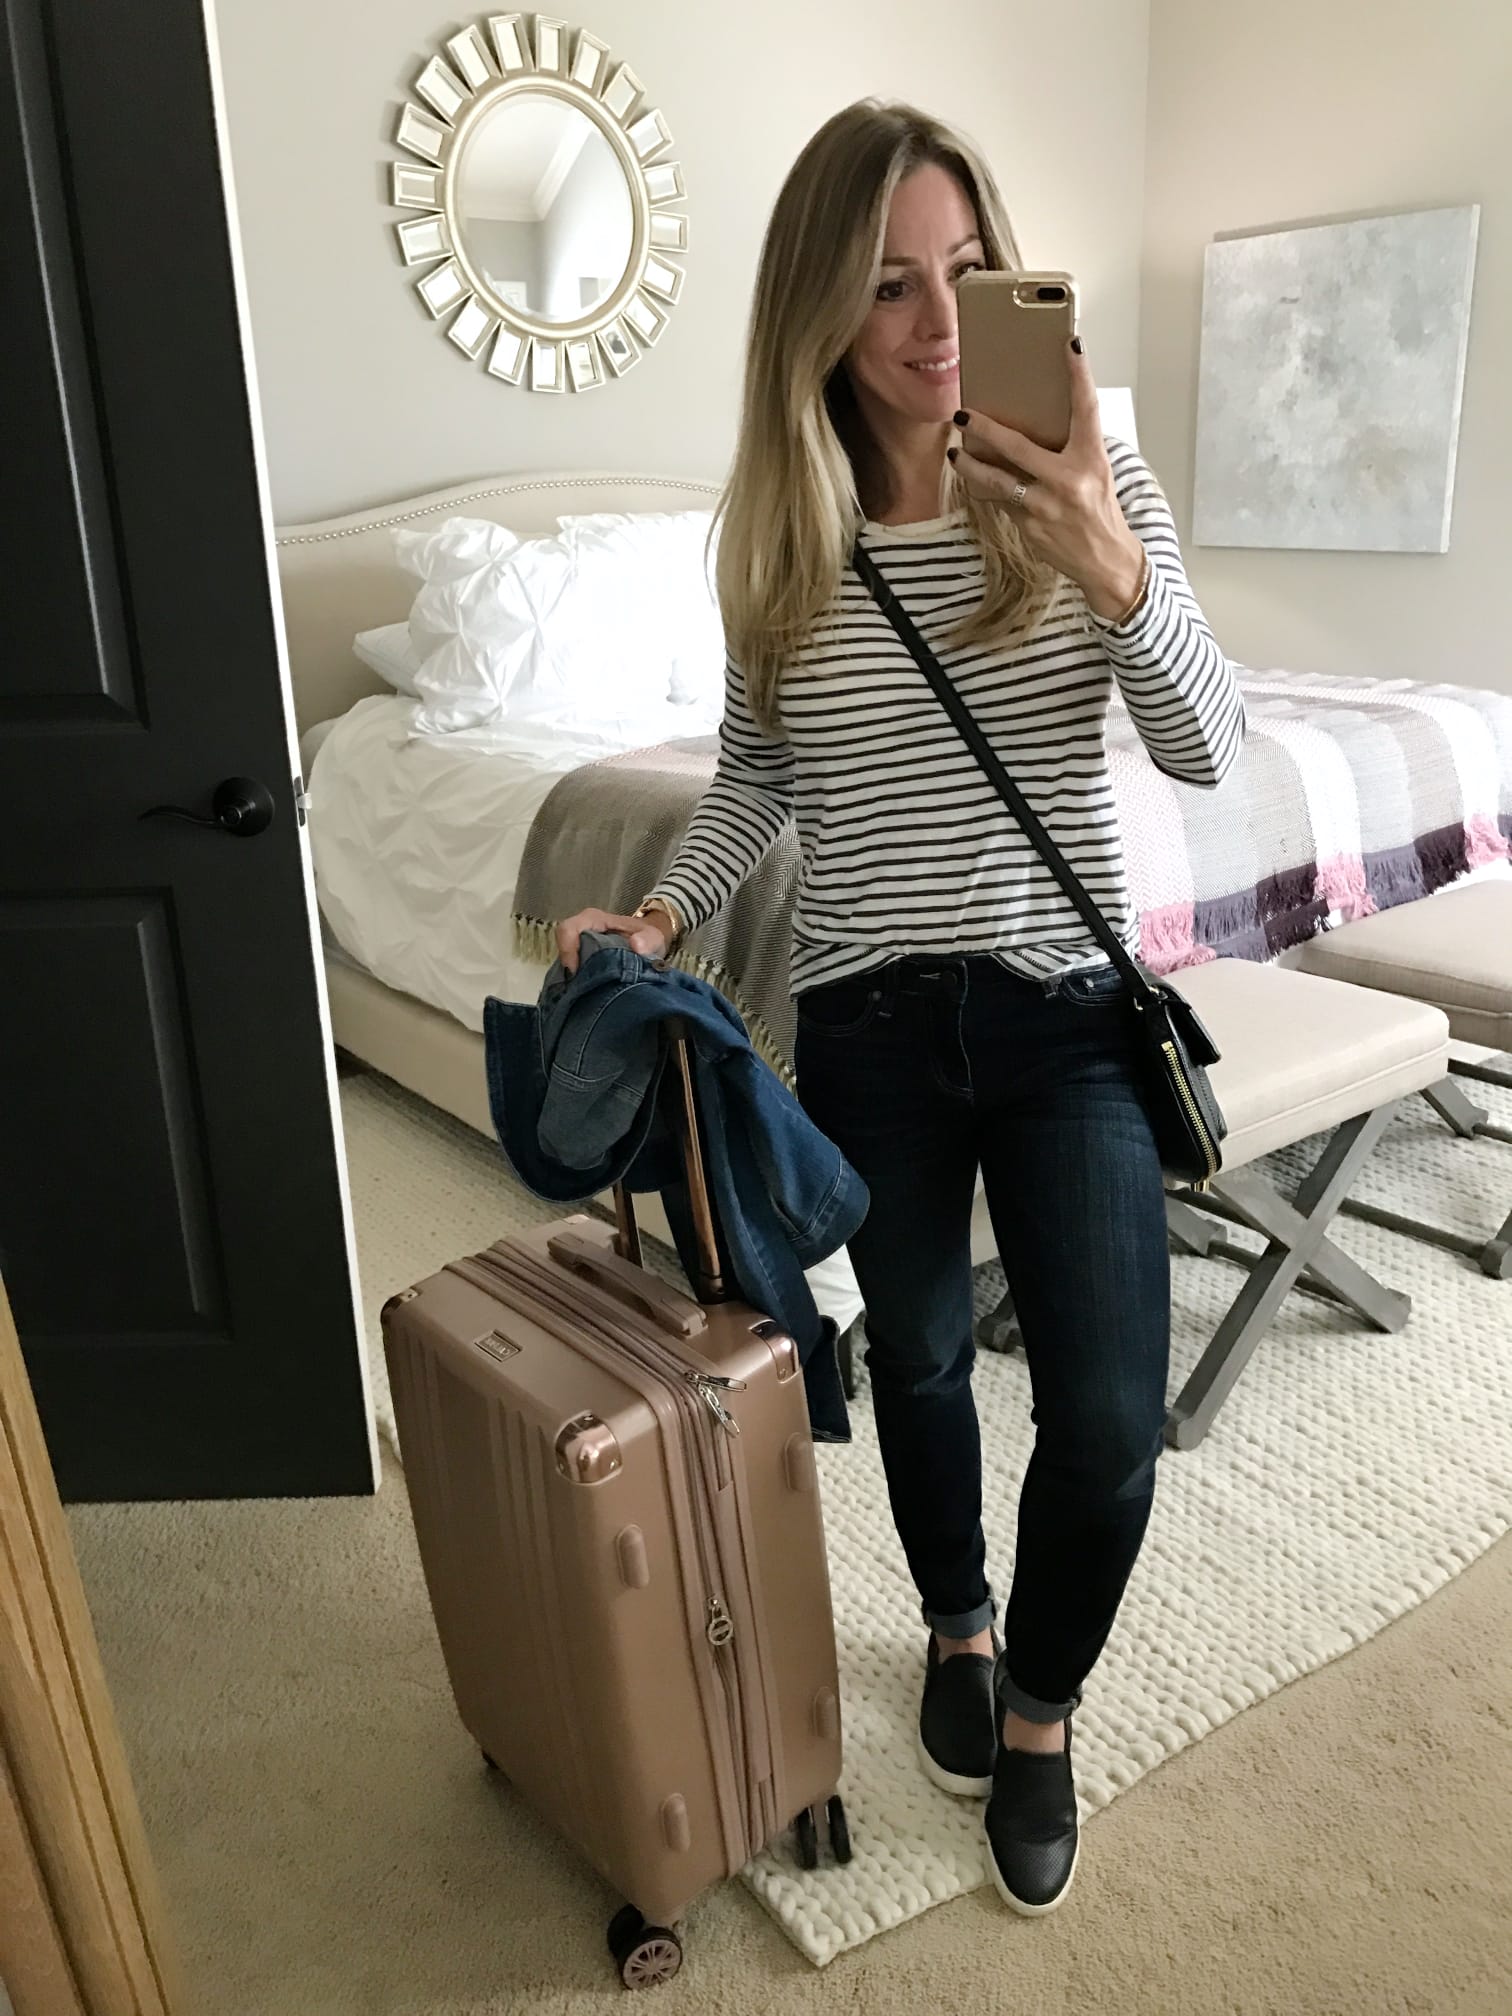 Fall fashion comfy travel outfit – striped top, jeans and slip on